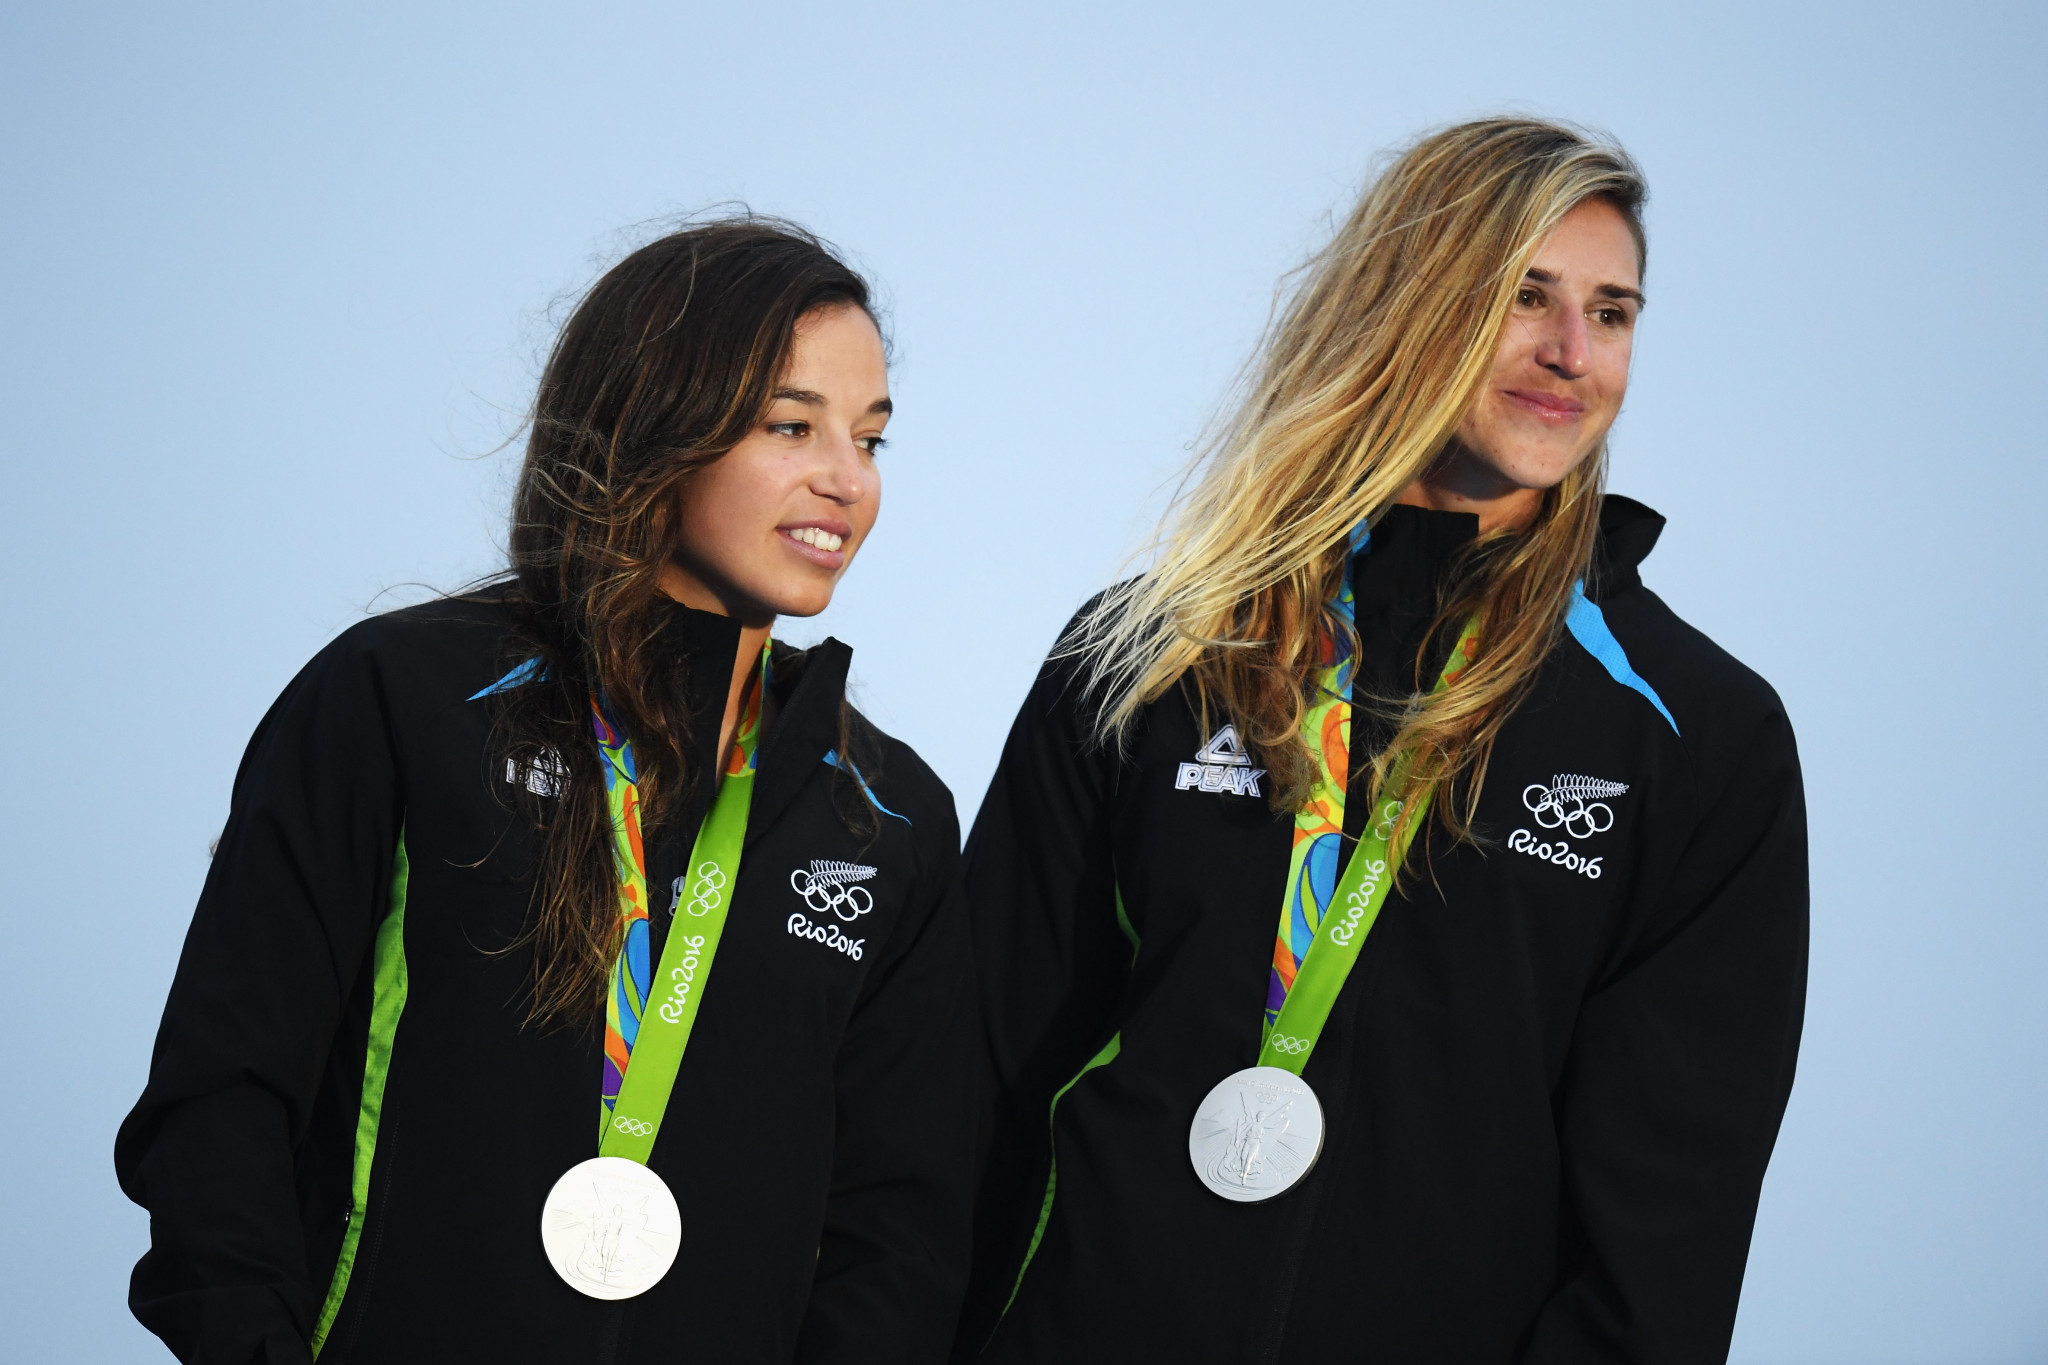 Molly Meech, right, won a silver medal with her sailing partner Alex Maloney, left ©Getty Images